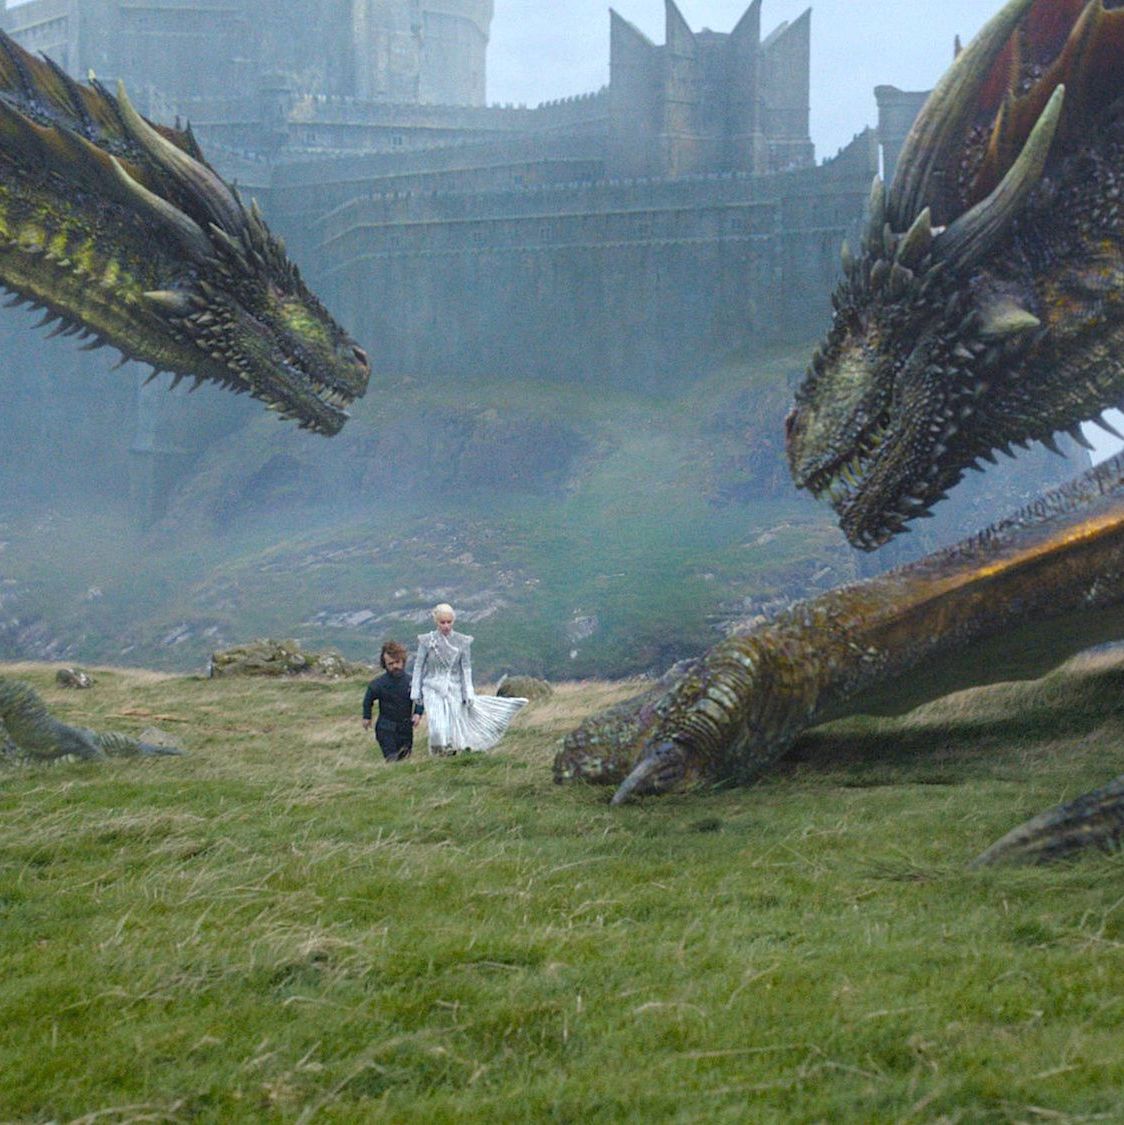 Men's Game Of Thrones: House Of The Dragon Fire-breathing Dragon